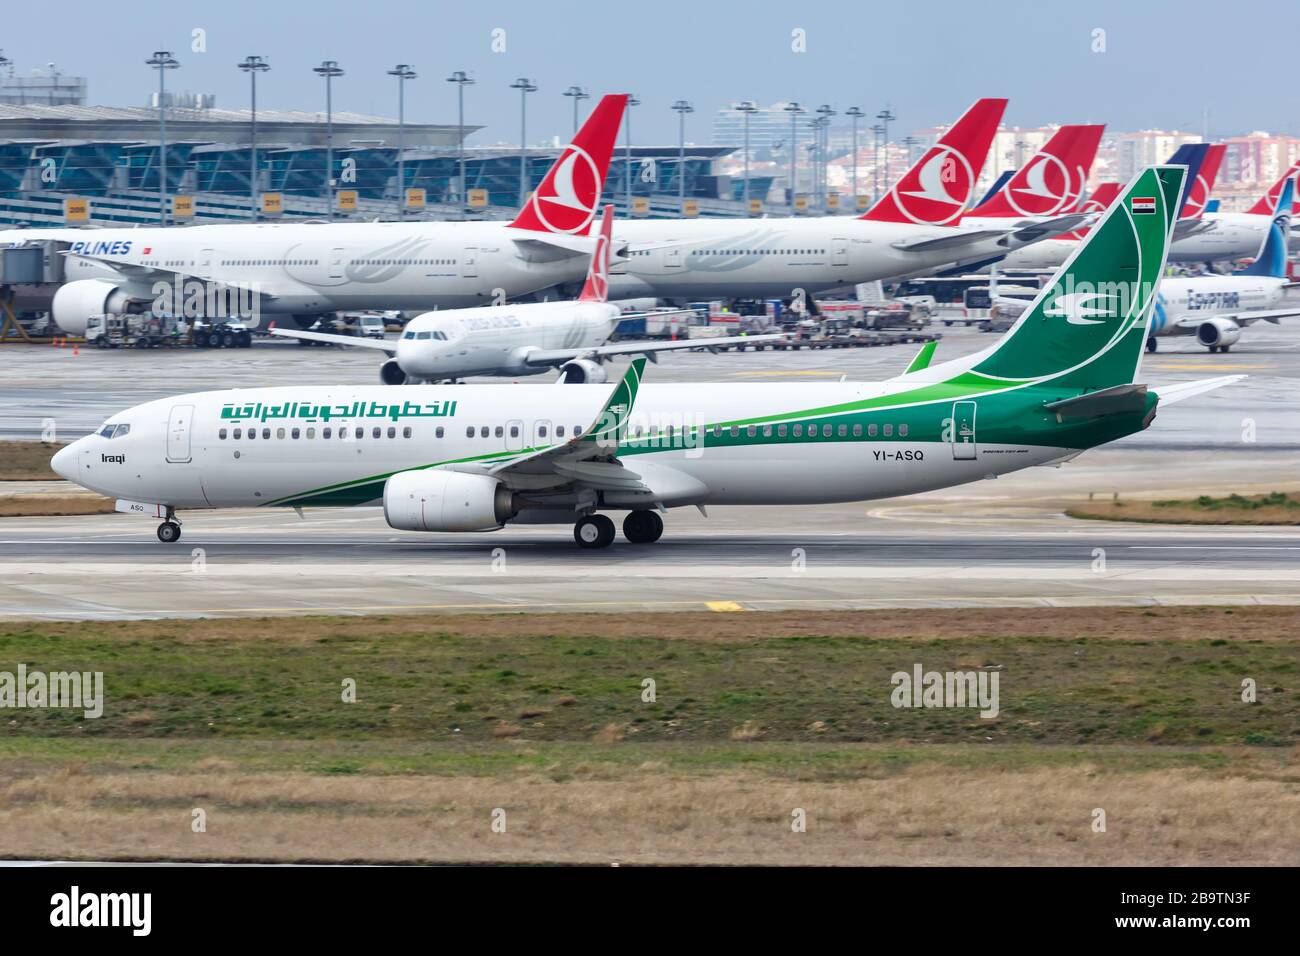 Istanbul, Turkey – February 15, 2019: Iraqi Airways Boeing 737 airplane at Istanbul Ataturk airport (IST) in Turkey. Boeing is an American aircraft ma Stock Photo